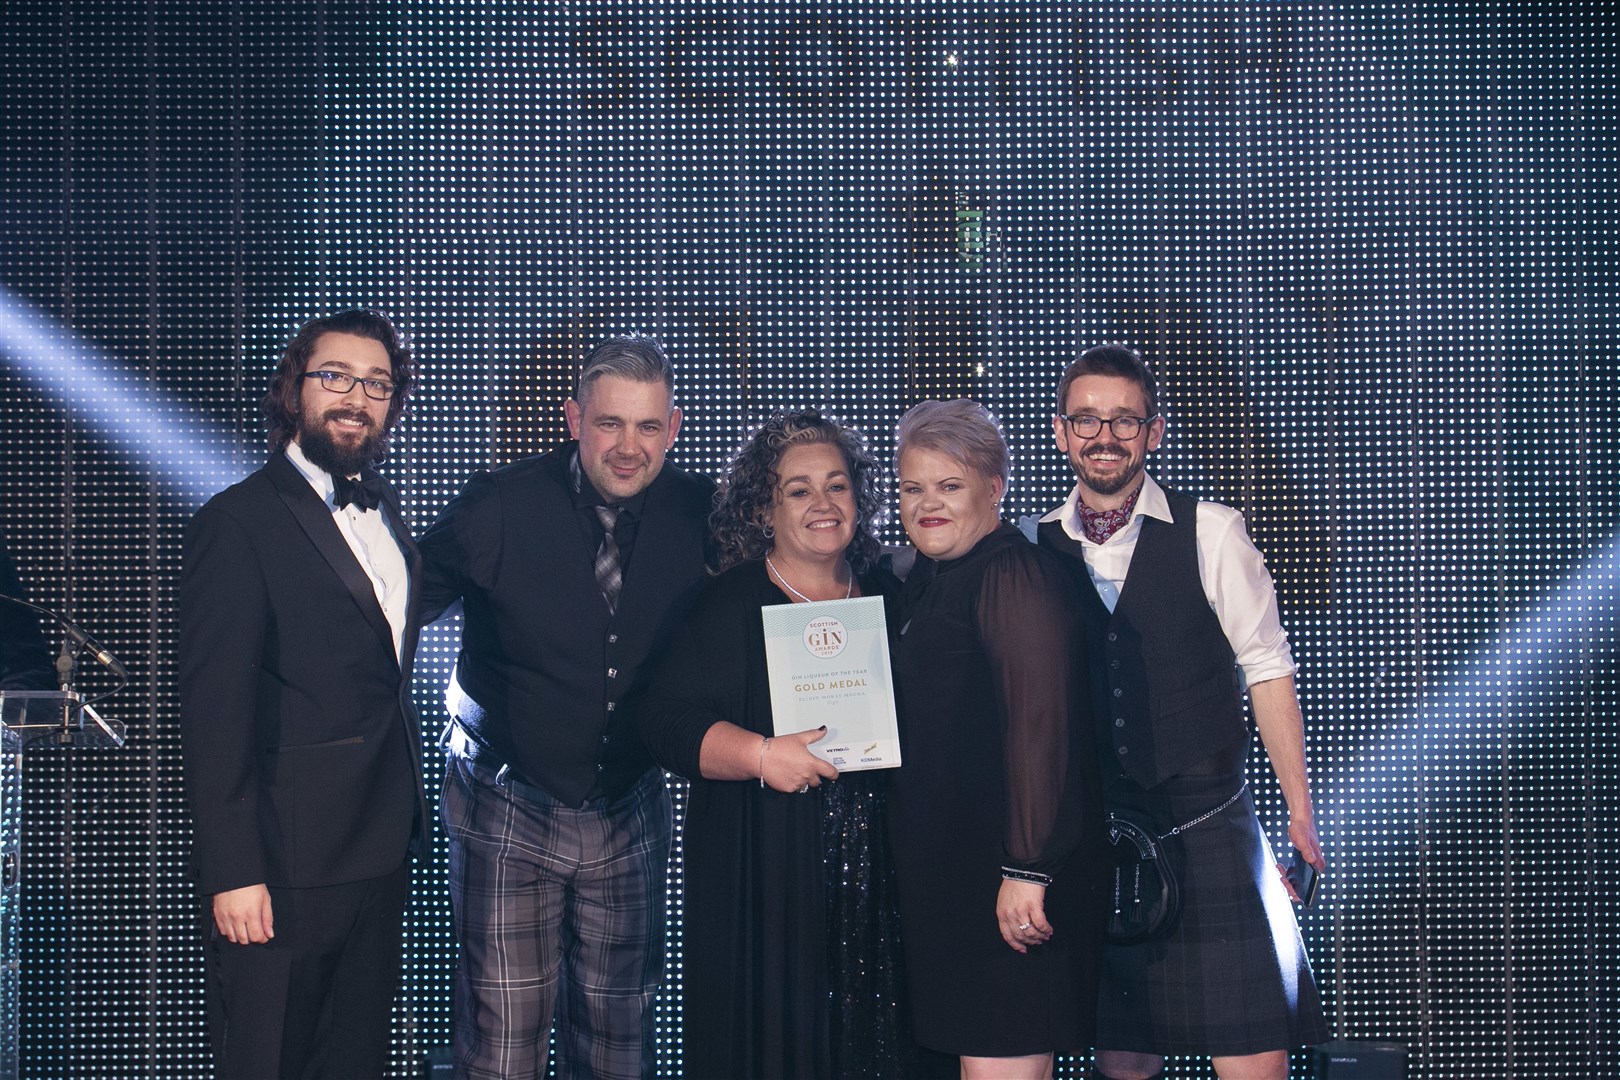 Members of the El:gin team with the gold award for Gin Liqueur of the Year at the Scottish Gin Awards. Picture: DMcCallum